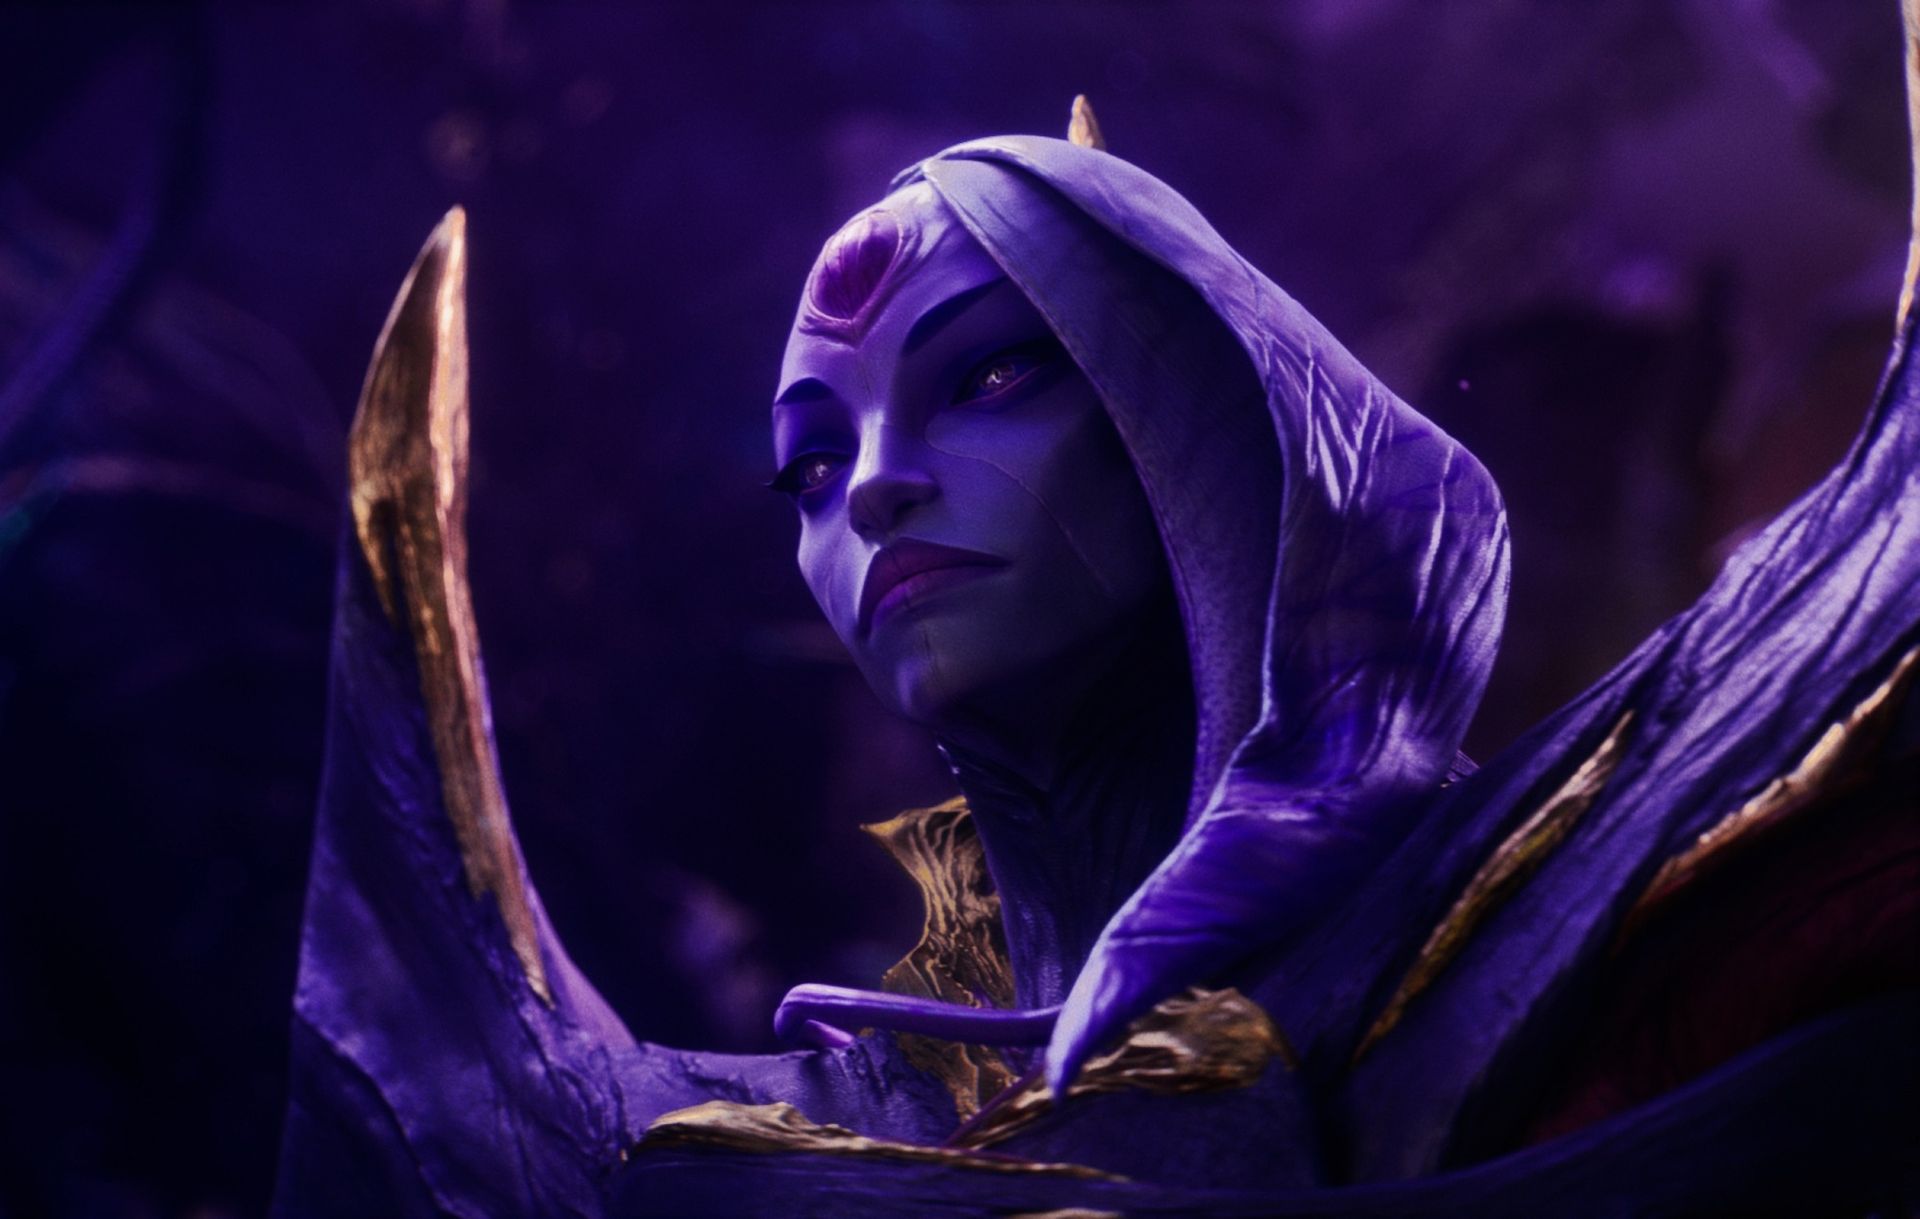 You will find the list of Bel Veth League of Legends abilities in this article. Last month we reported that The Empress of the Void, Bel'Veth, would be the next champion set to join League of Legends' world-famous roster.